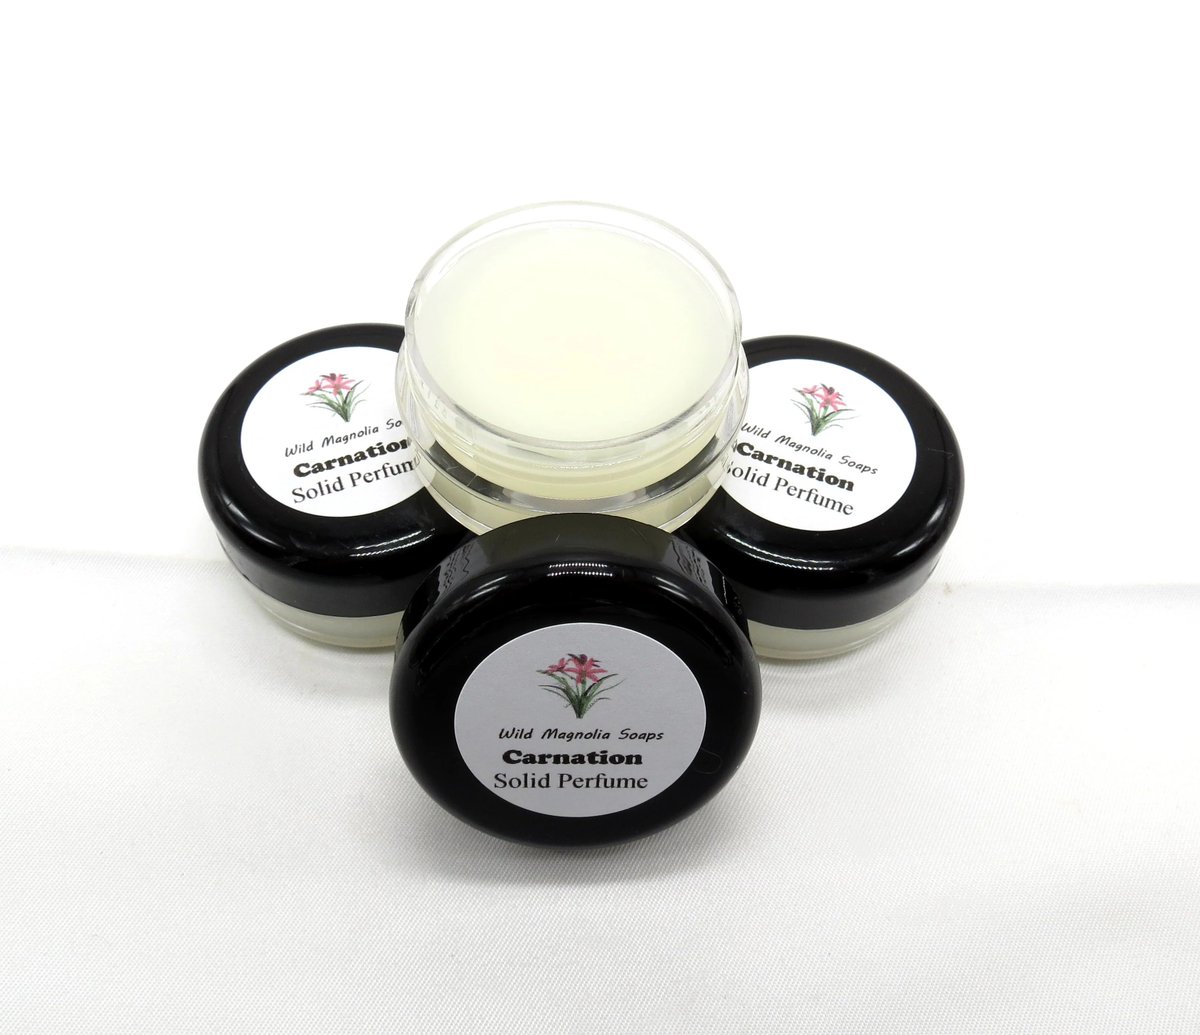 Sale ends tonight - Carnation Solid Perfume - A crisp, clean aroma of freshly picked carnation flowers with bottom notes of fresh greenery.

#carnation #perfumesale #perfumeshop
tinyurl.com/rae9mx74